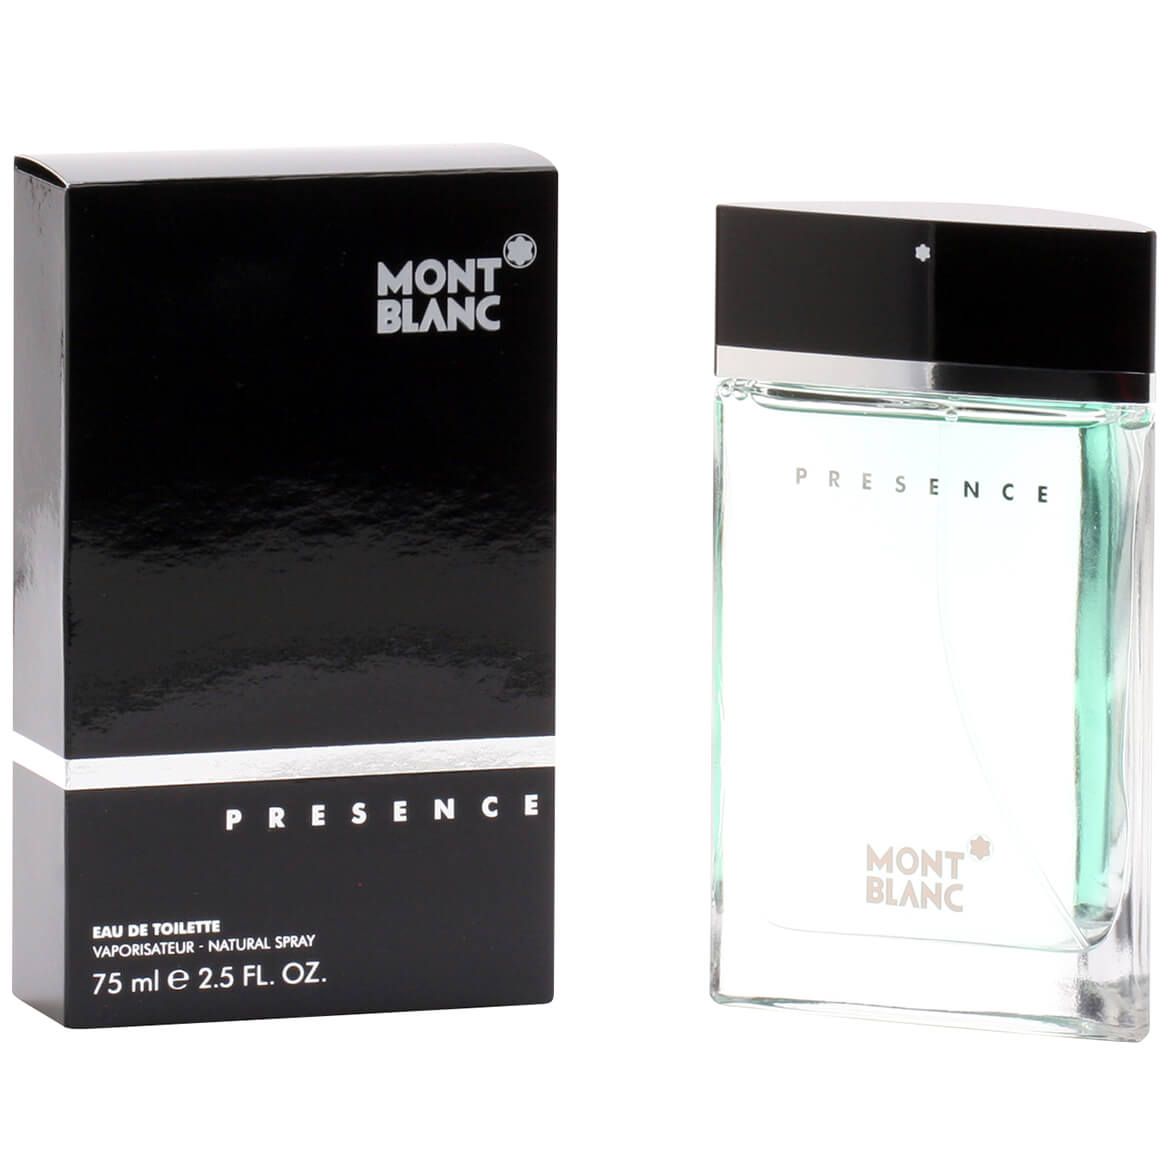 Presence by Mont Blanc for Men EDT, 2.5 oz. + '-' + 373176